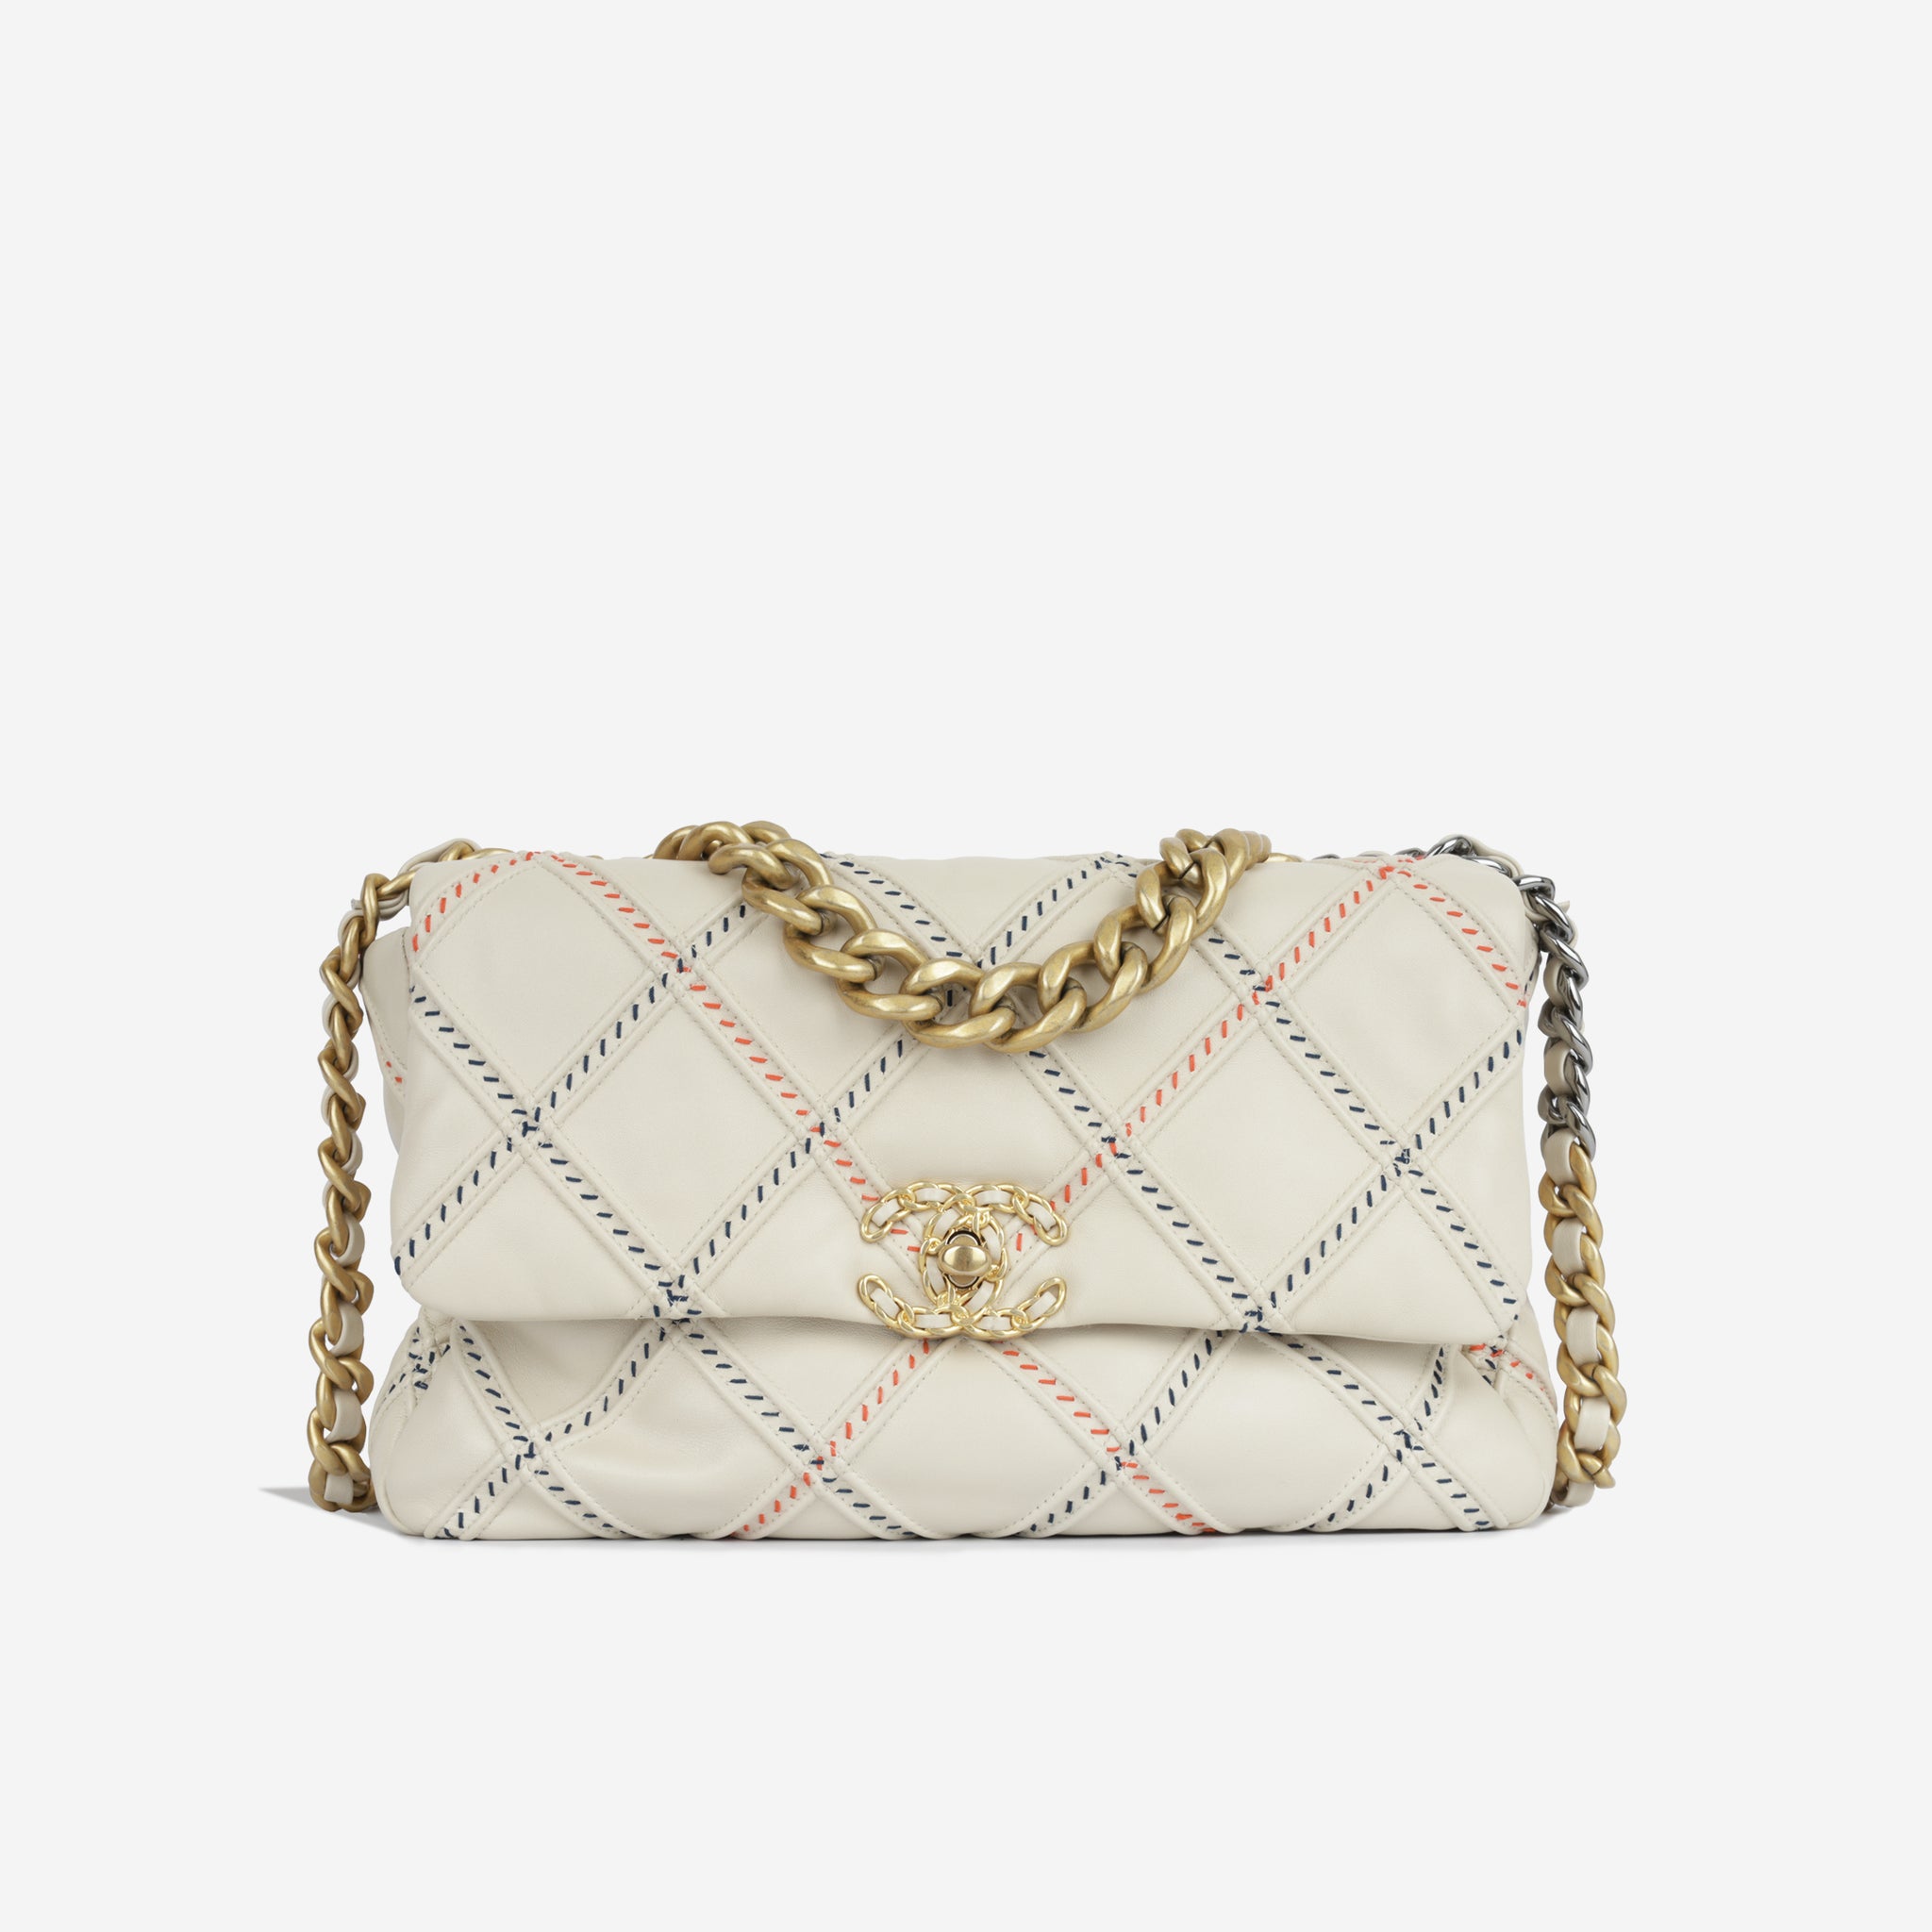 Chanel - Large 19 Flap Bag - Cream Quilted Stitch Lambskin - 2021